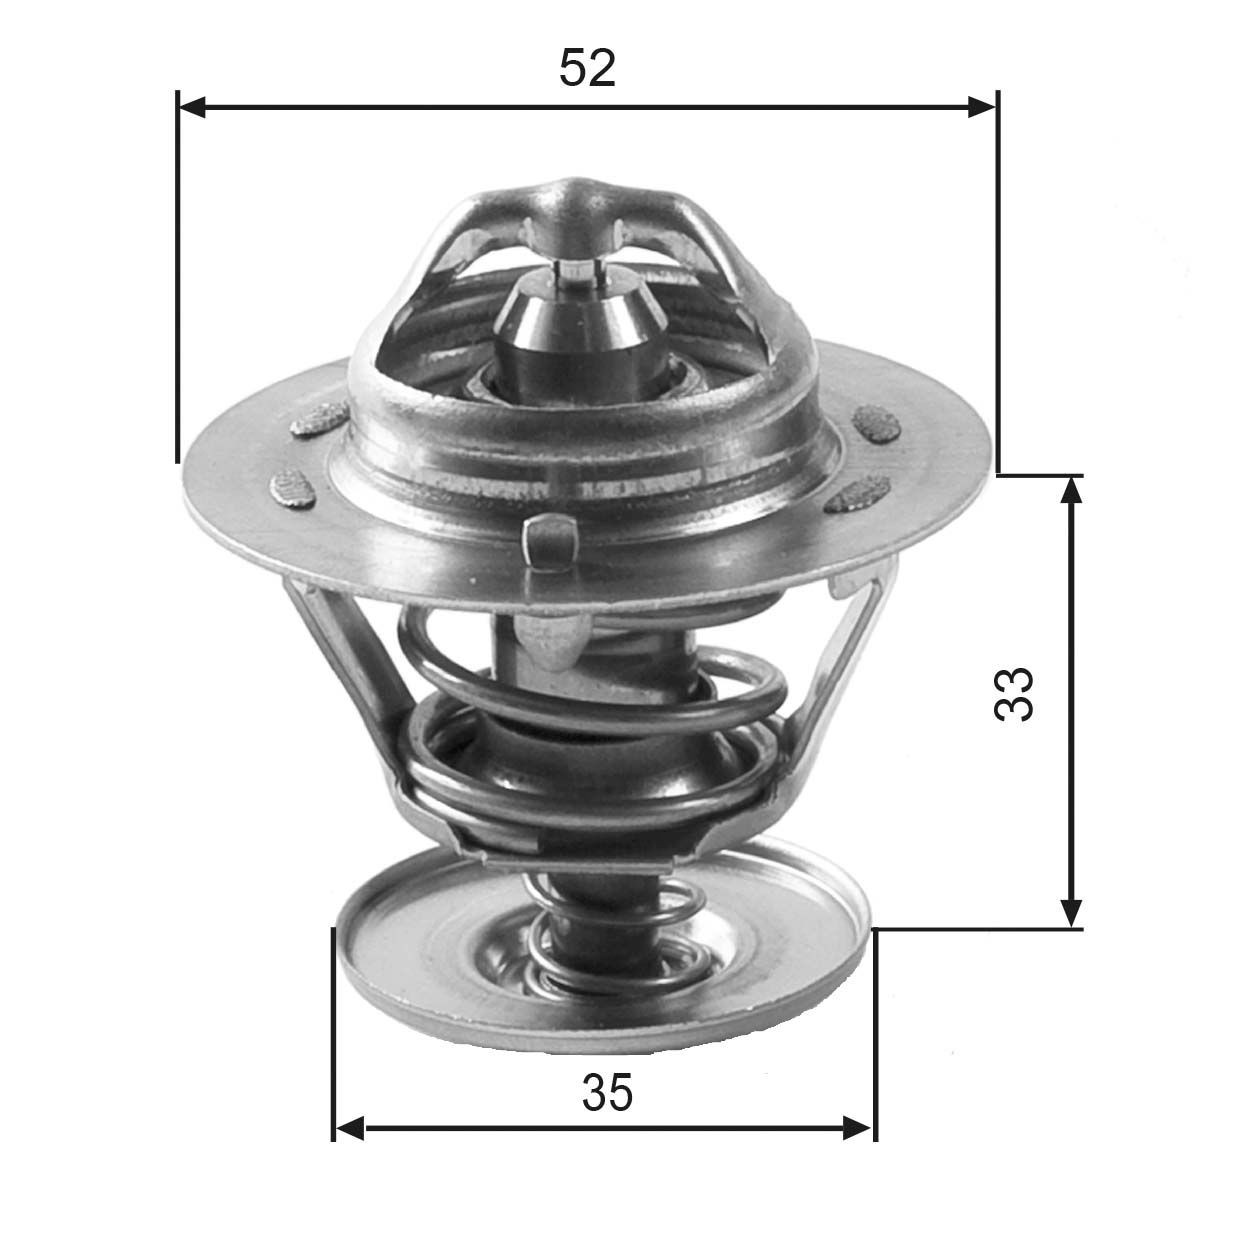 GATES TH12592G1 Engine thermostat Opening Temperature: 92°C, with gaskets/seals, without housing